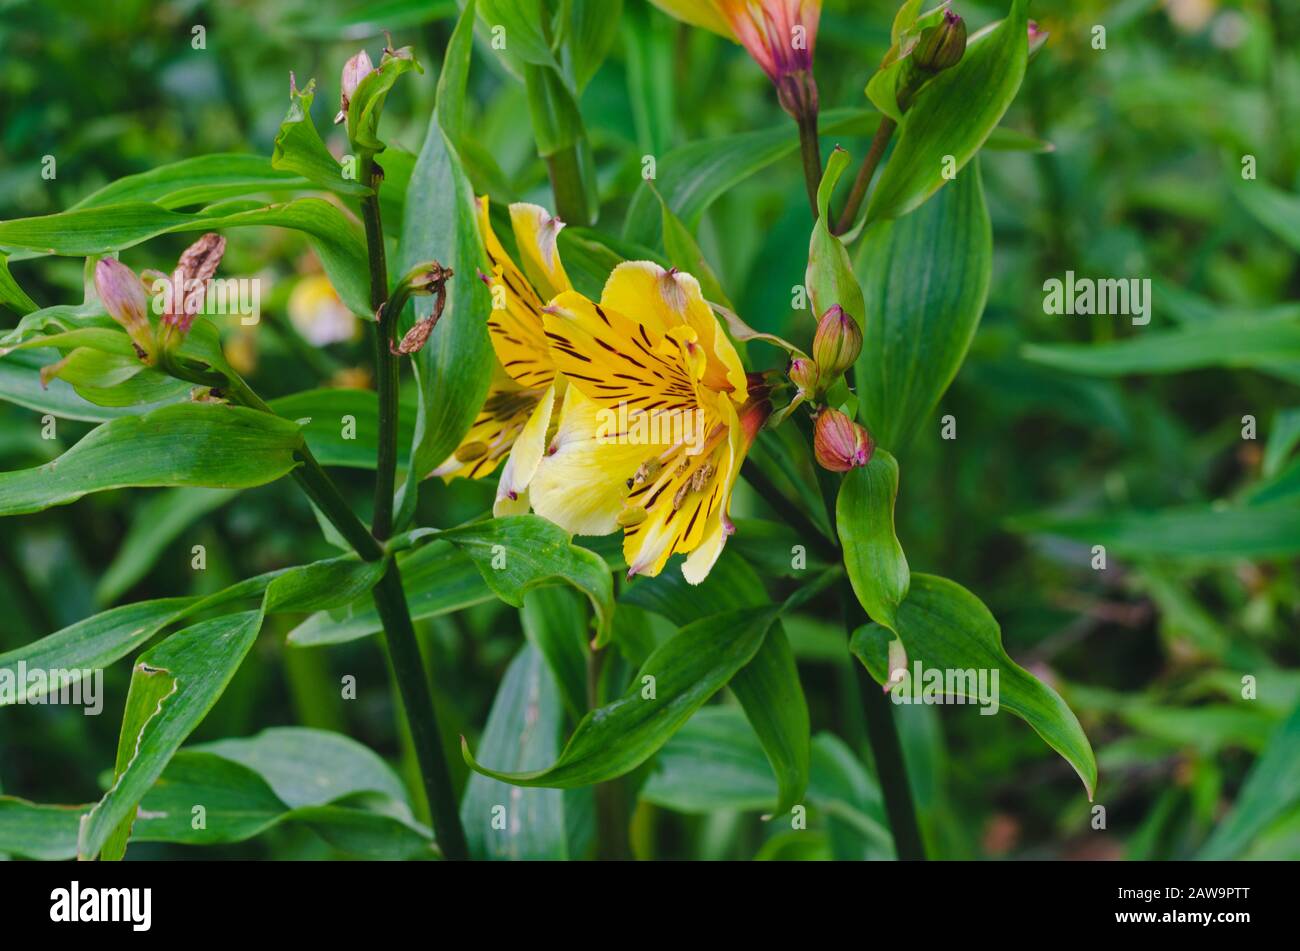 Peruvian lily in natural environment with flowers. Concept of nature. Stock Photo